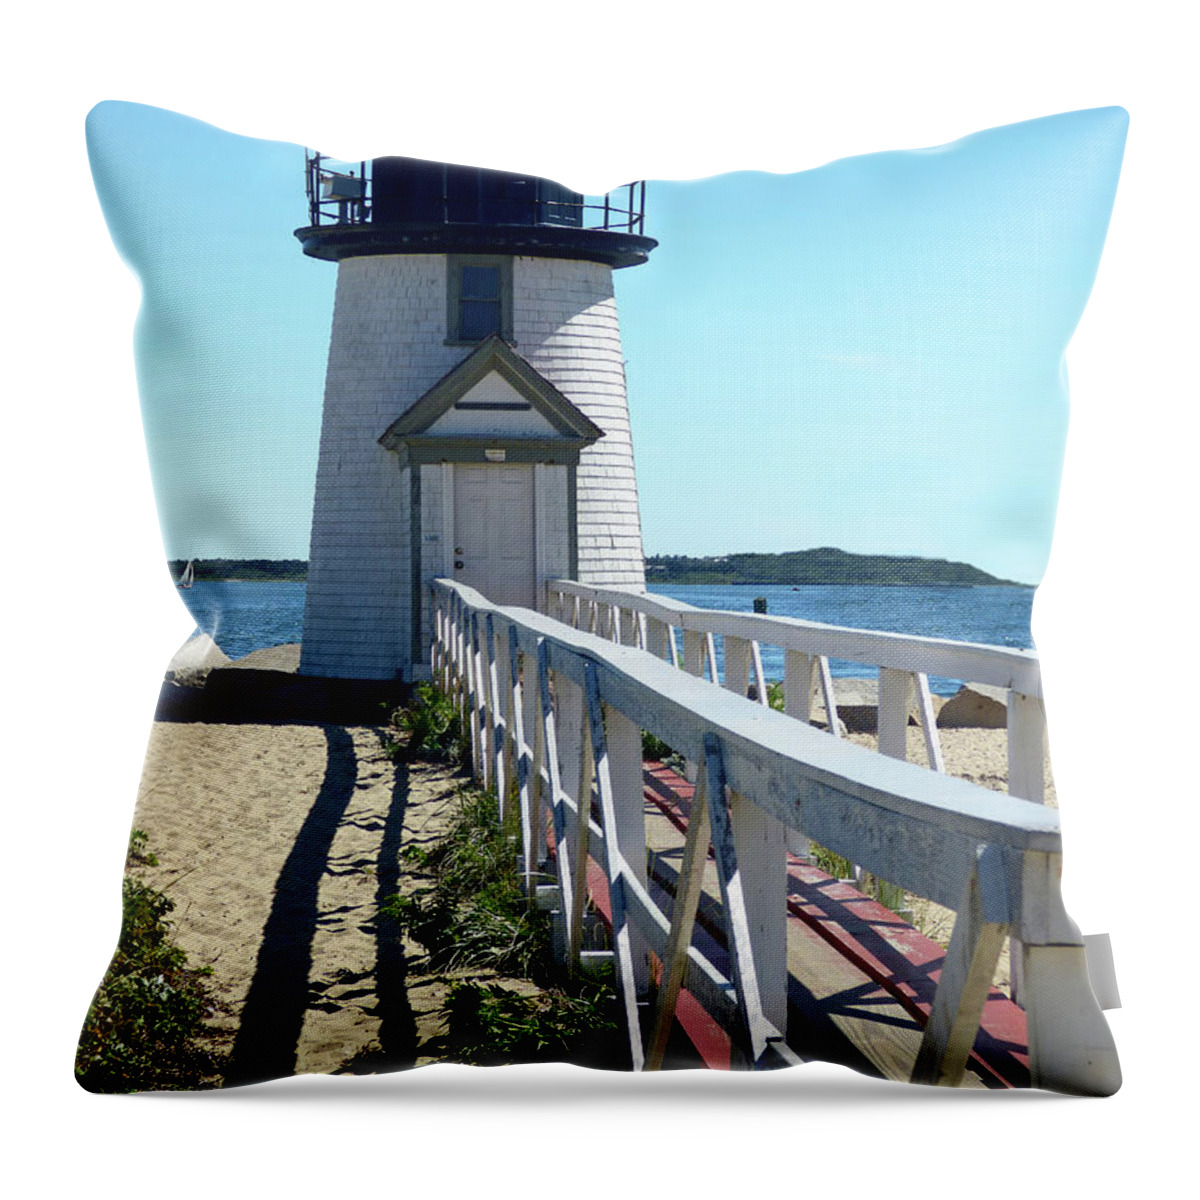 Nantucket Throw Pillow featuring the photograph Brant Point Lighthouse 300 by Sharon Williams Eng